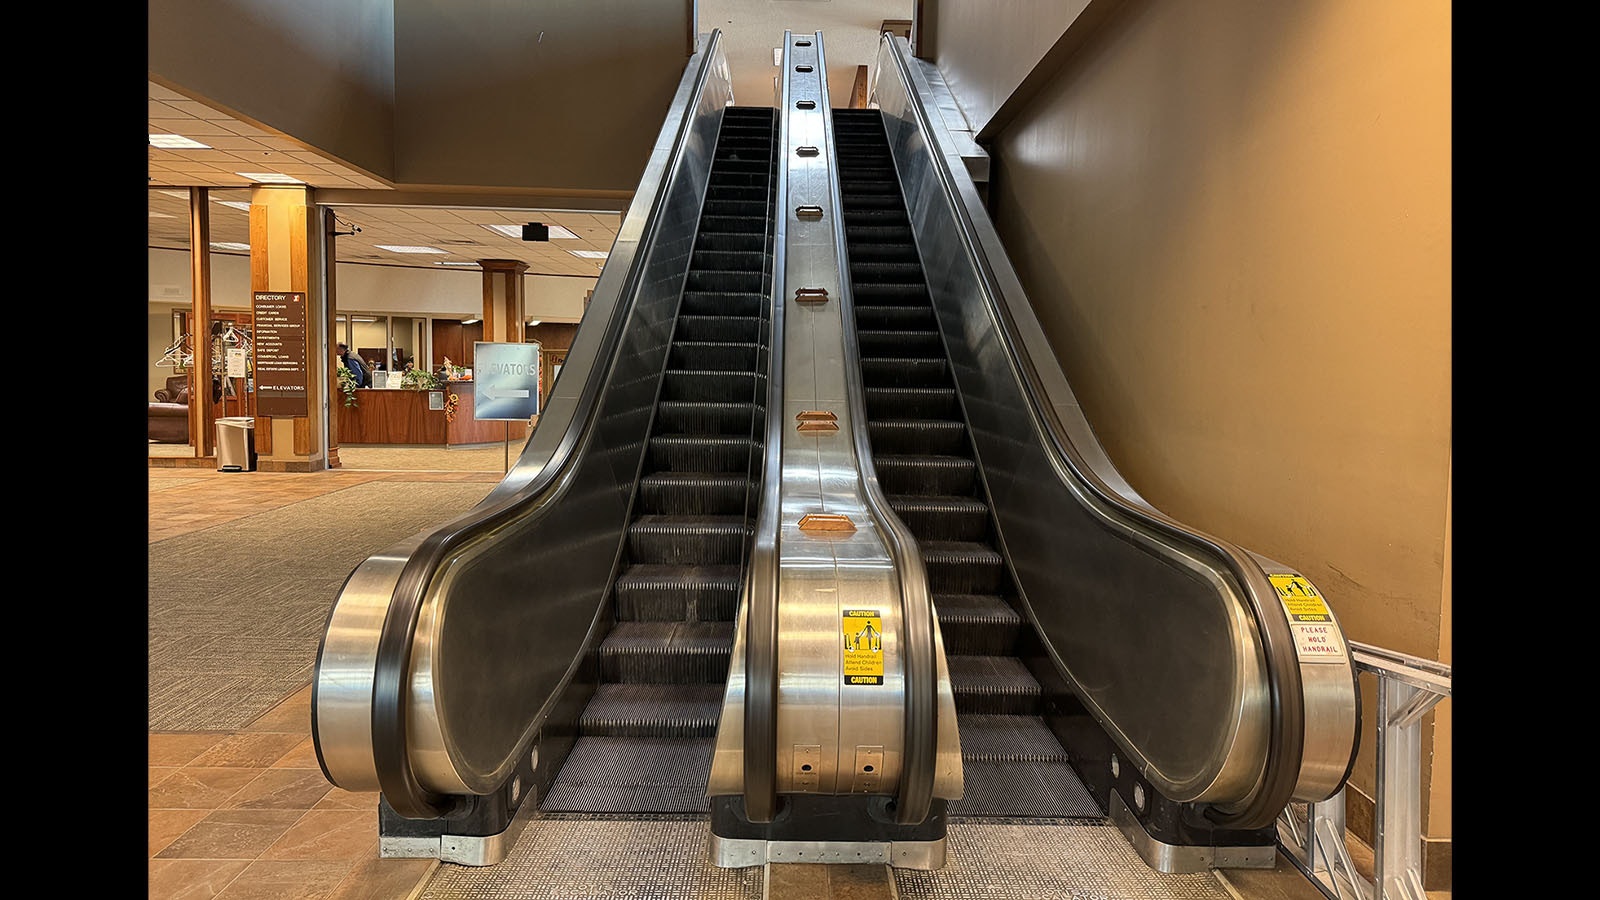 The escalators in the First Interstate Bank building in downtown Casper. These escalators were installed during the building's construction, which opened in 1958.